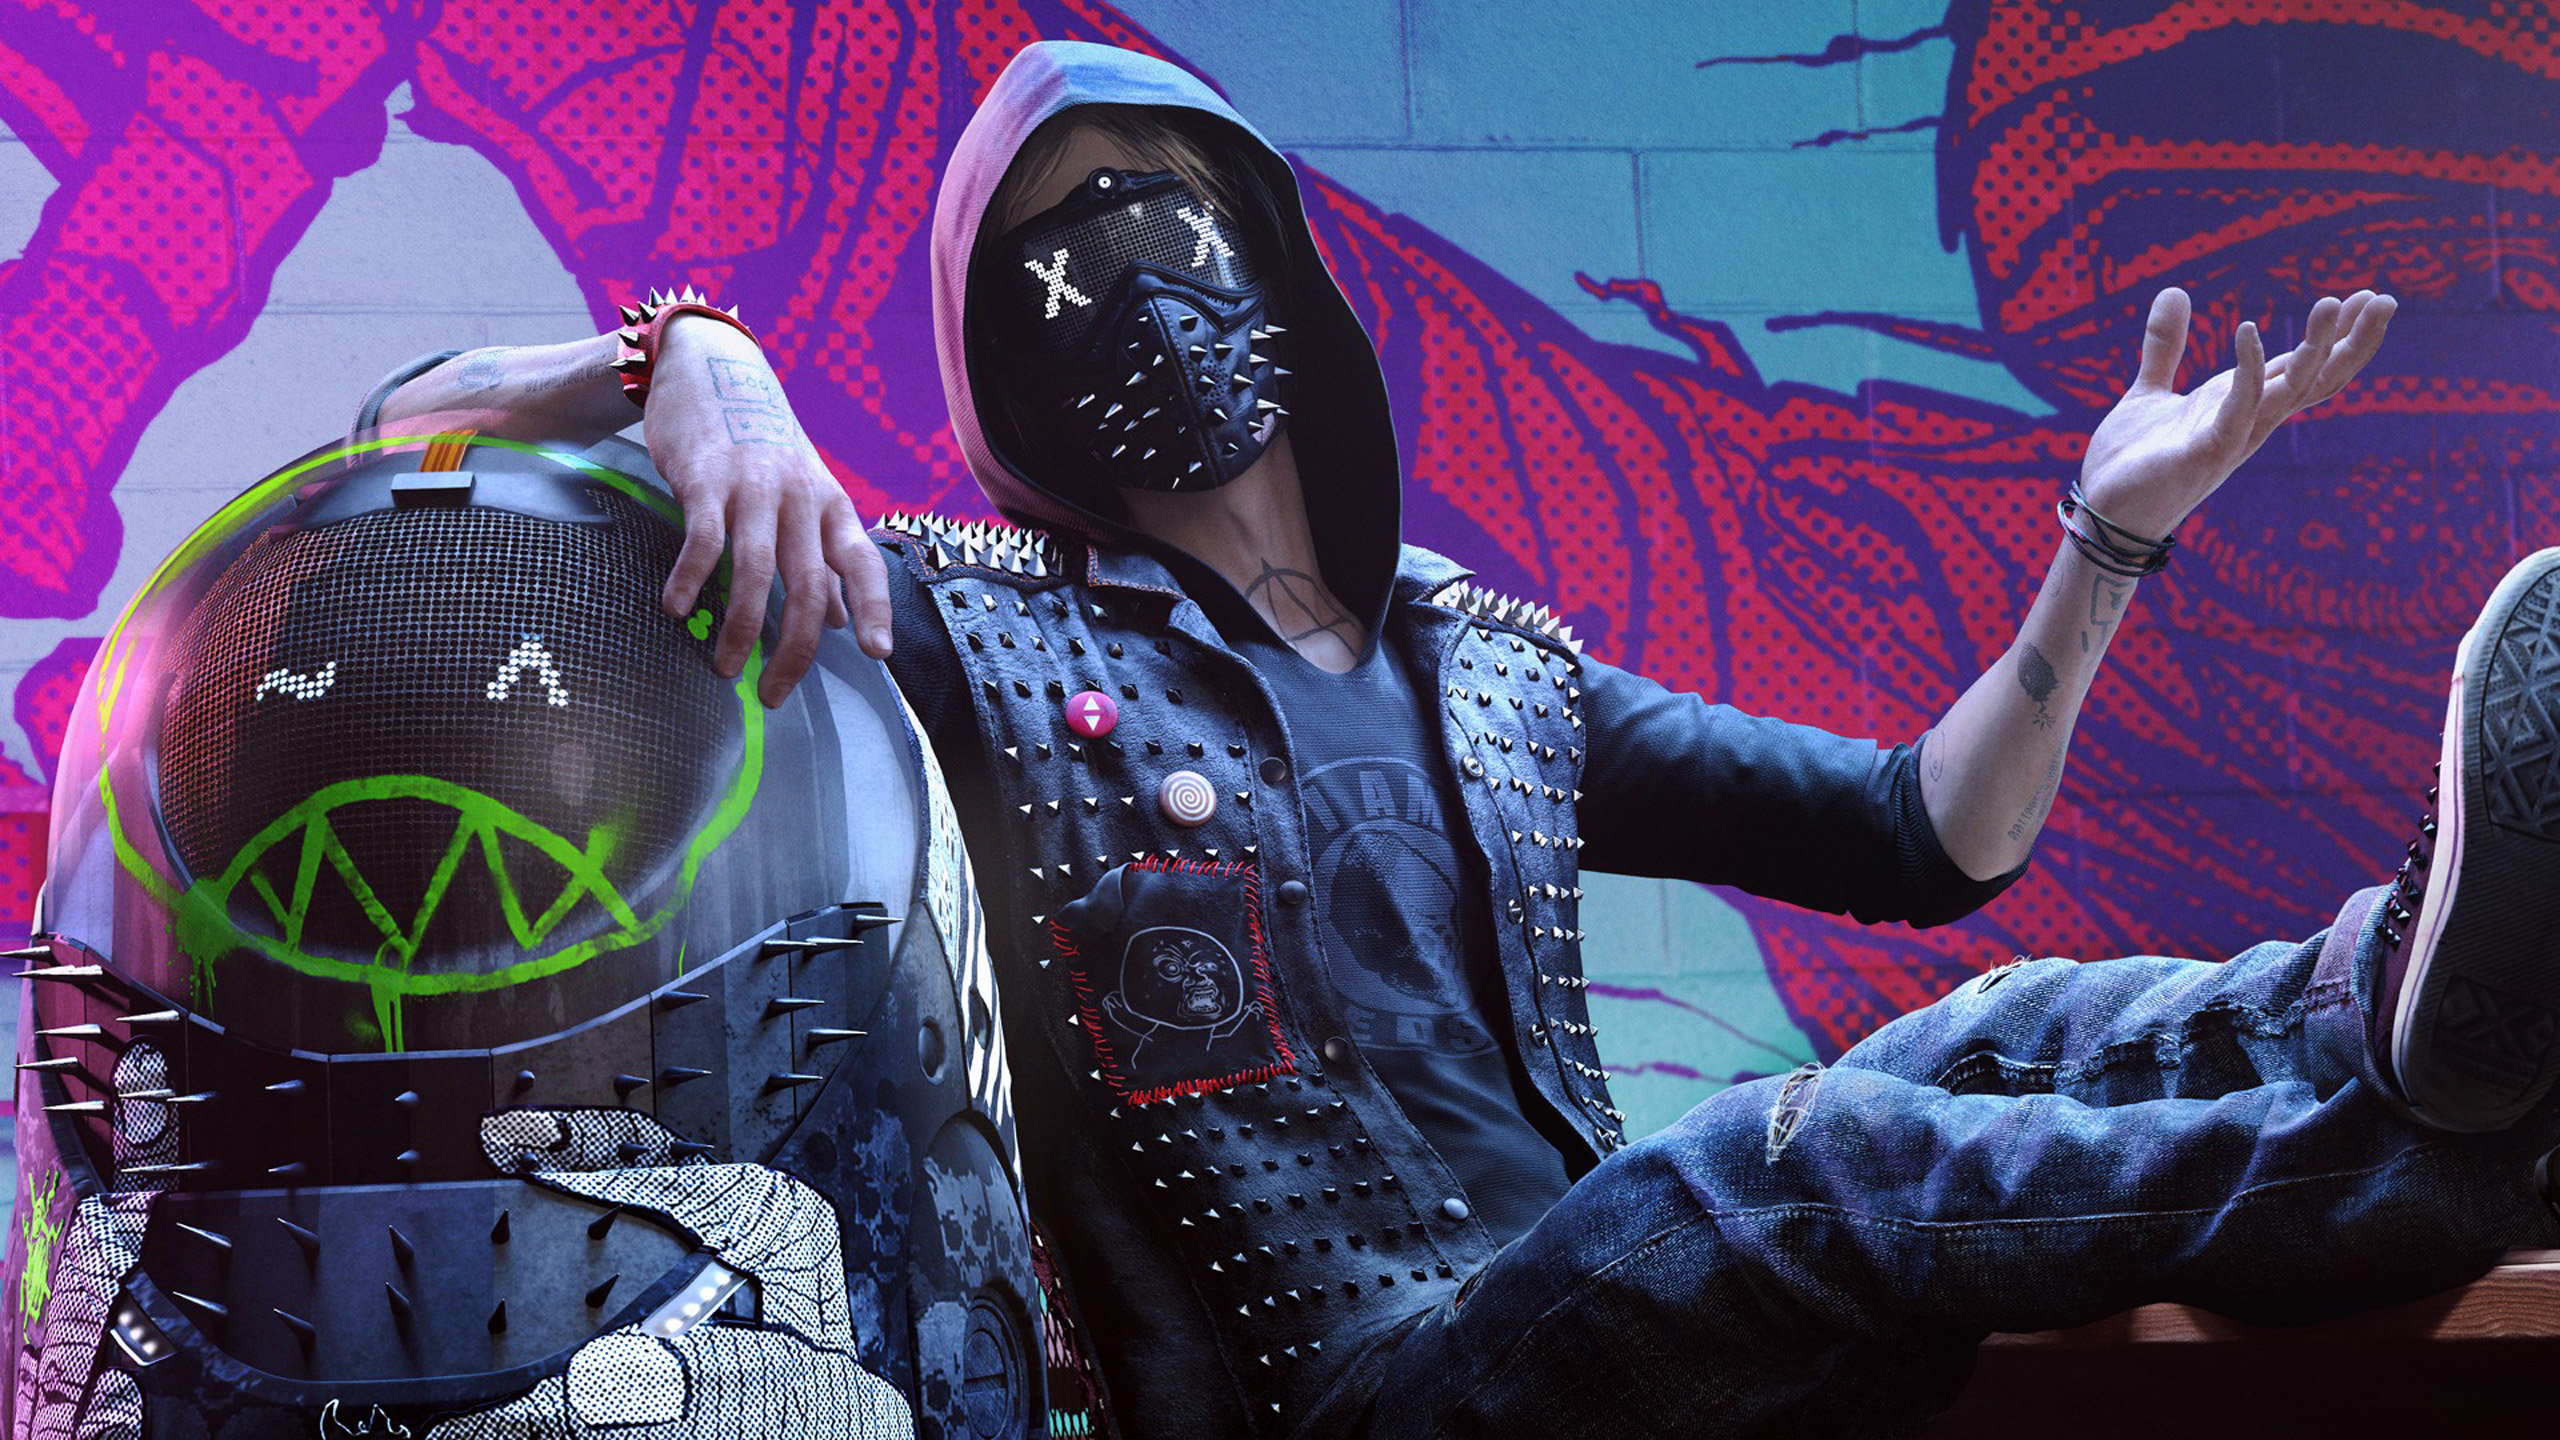 Free Watch Dogs 2 high quality wallpaper ID:366057 for hd 2560x1440 desktop